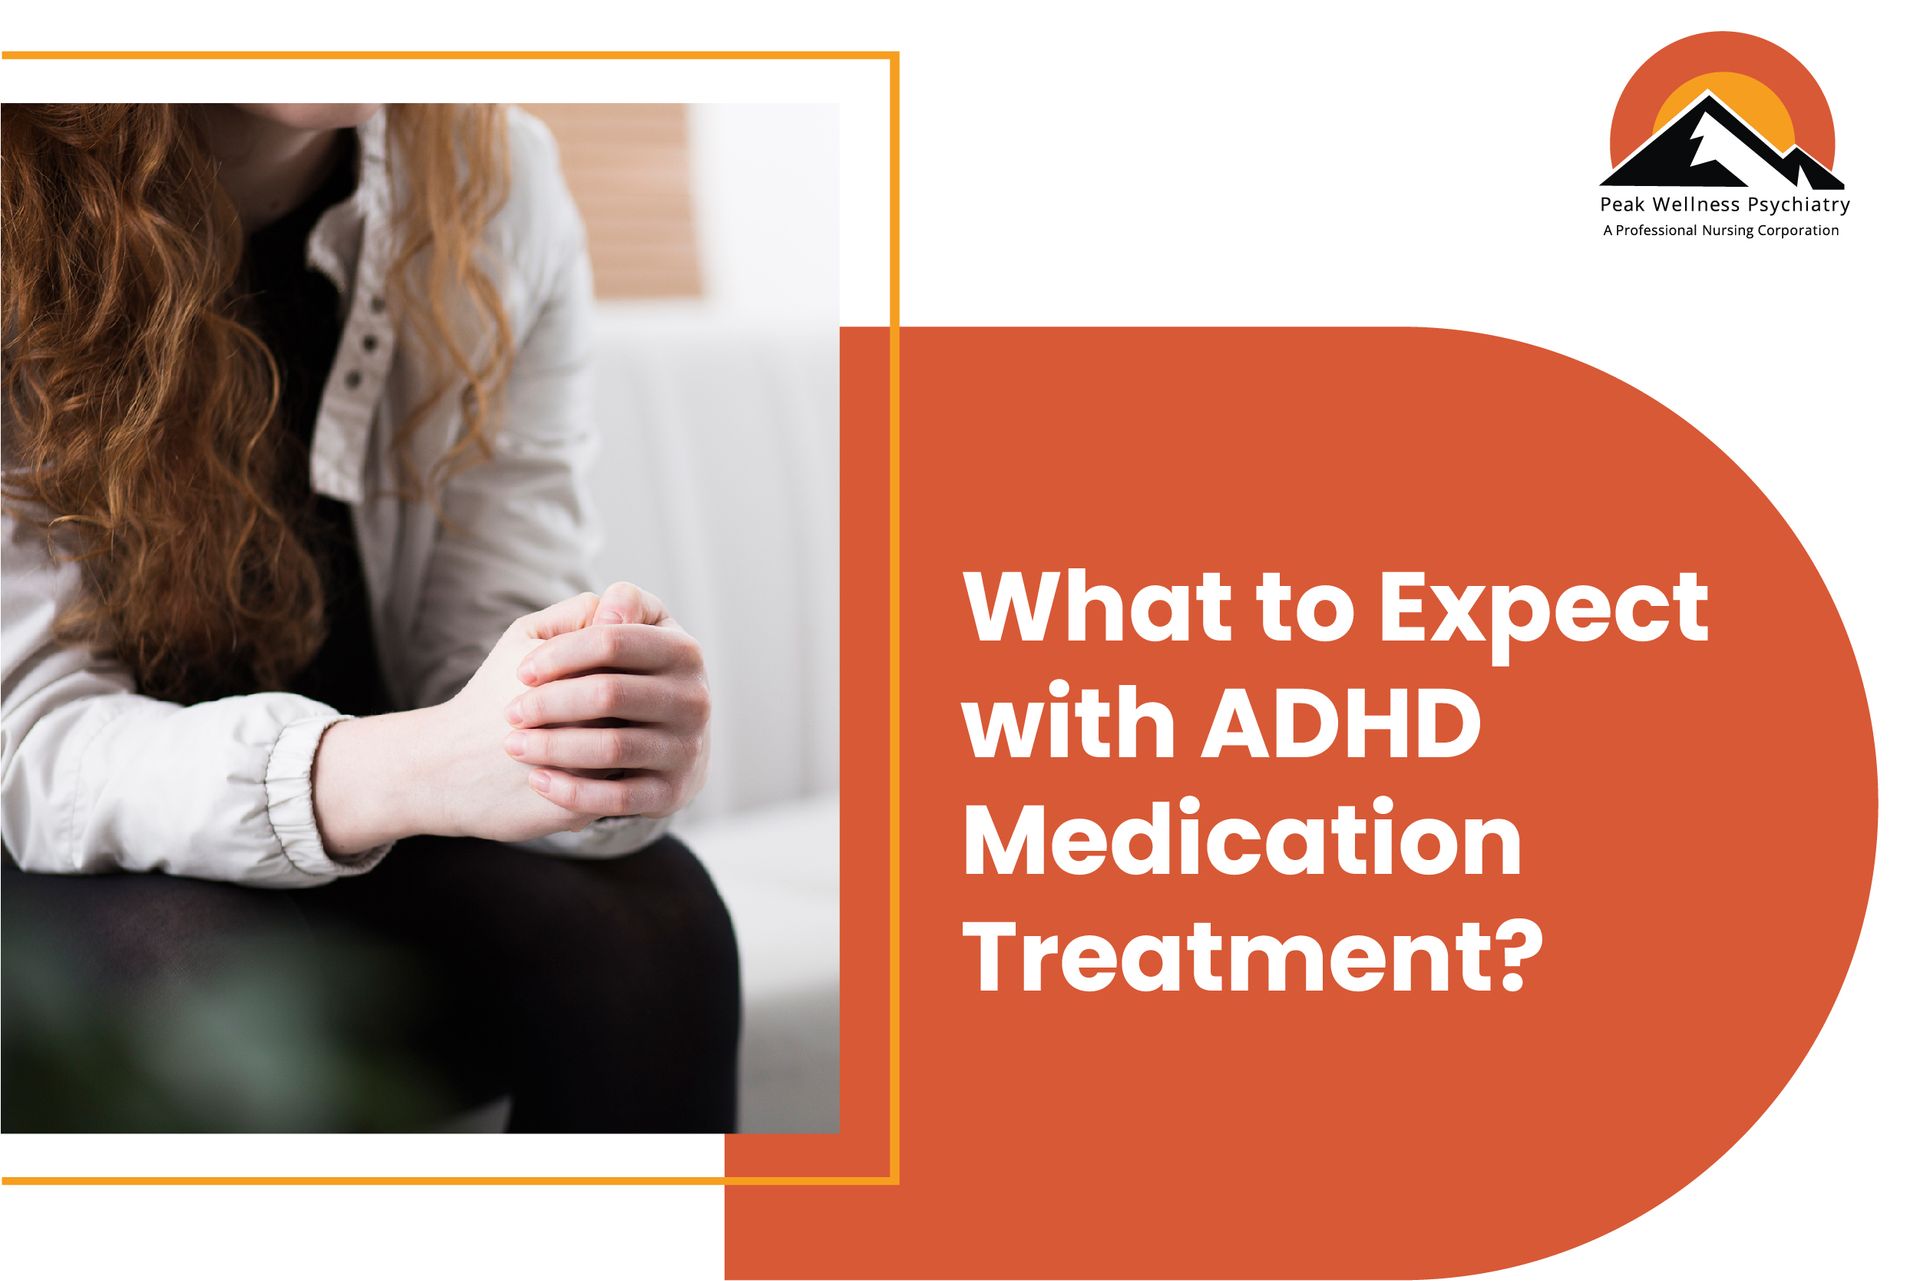 What to Expect with ADHD Medication Treatment?